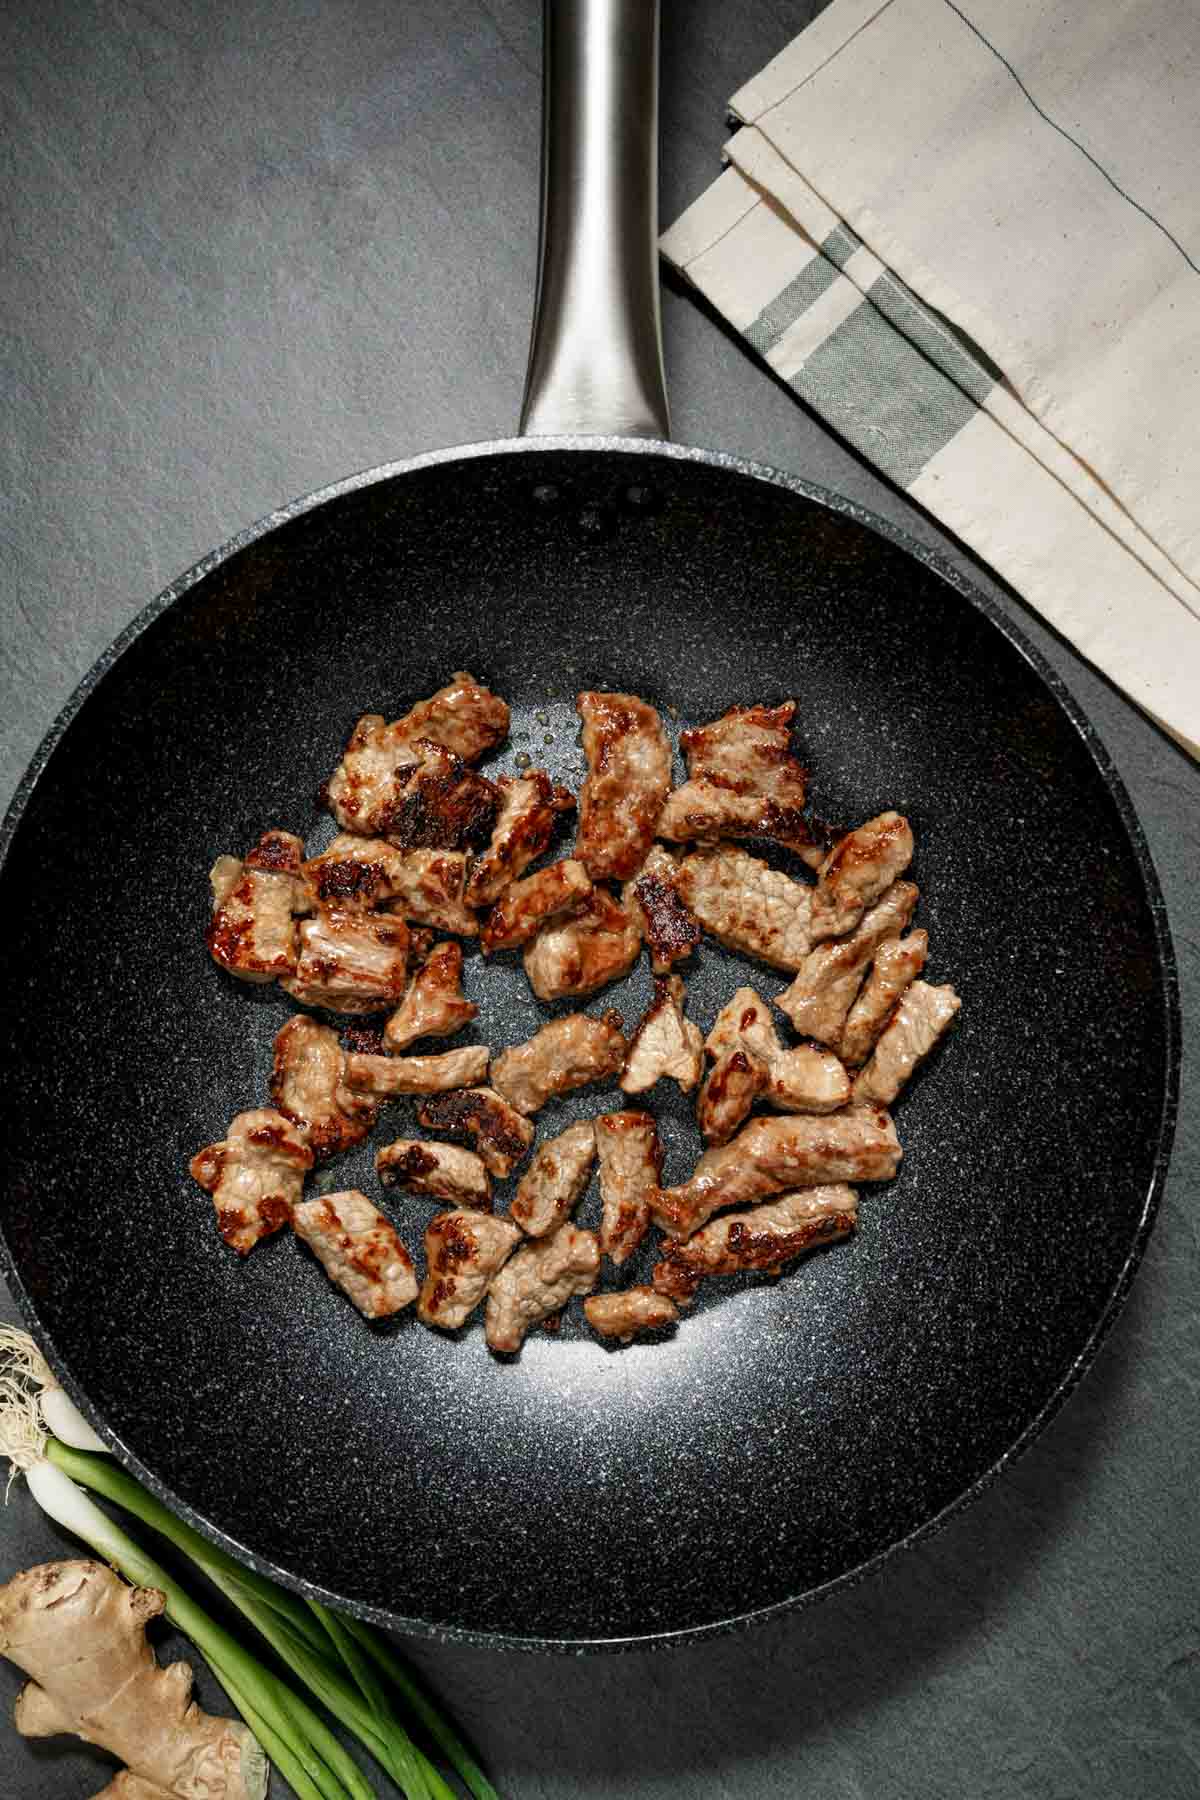 slices of lamb cooking in a skillet